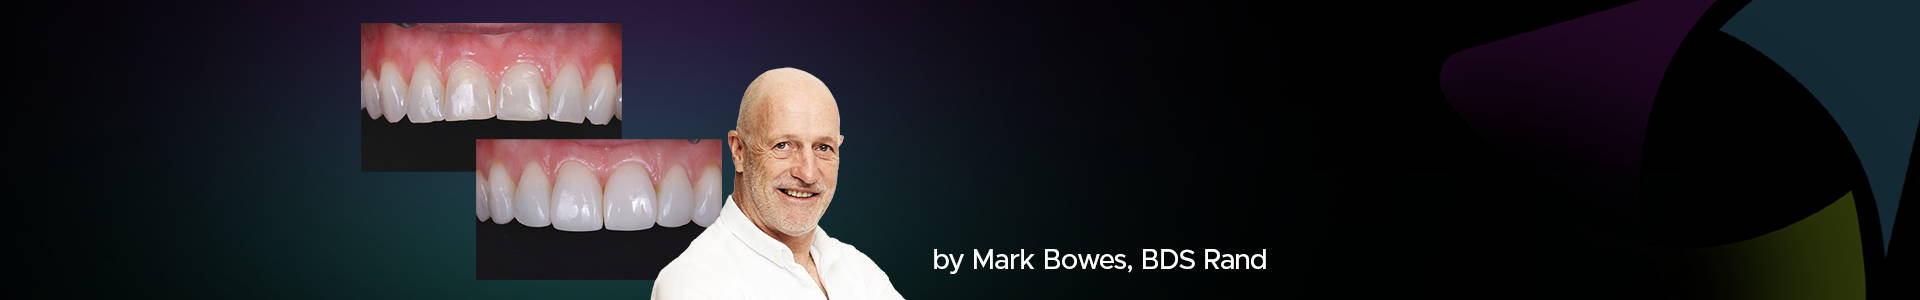 banner featuring Dr Mark Bowes and two clinical images